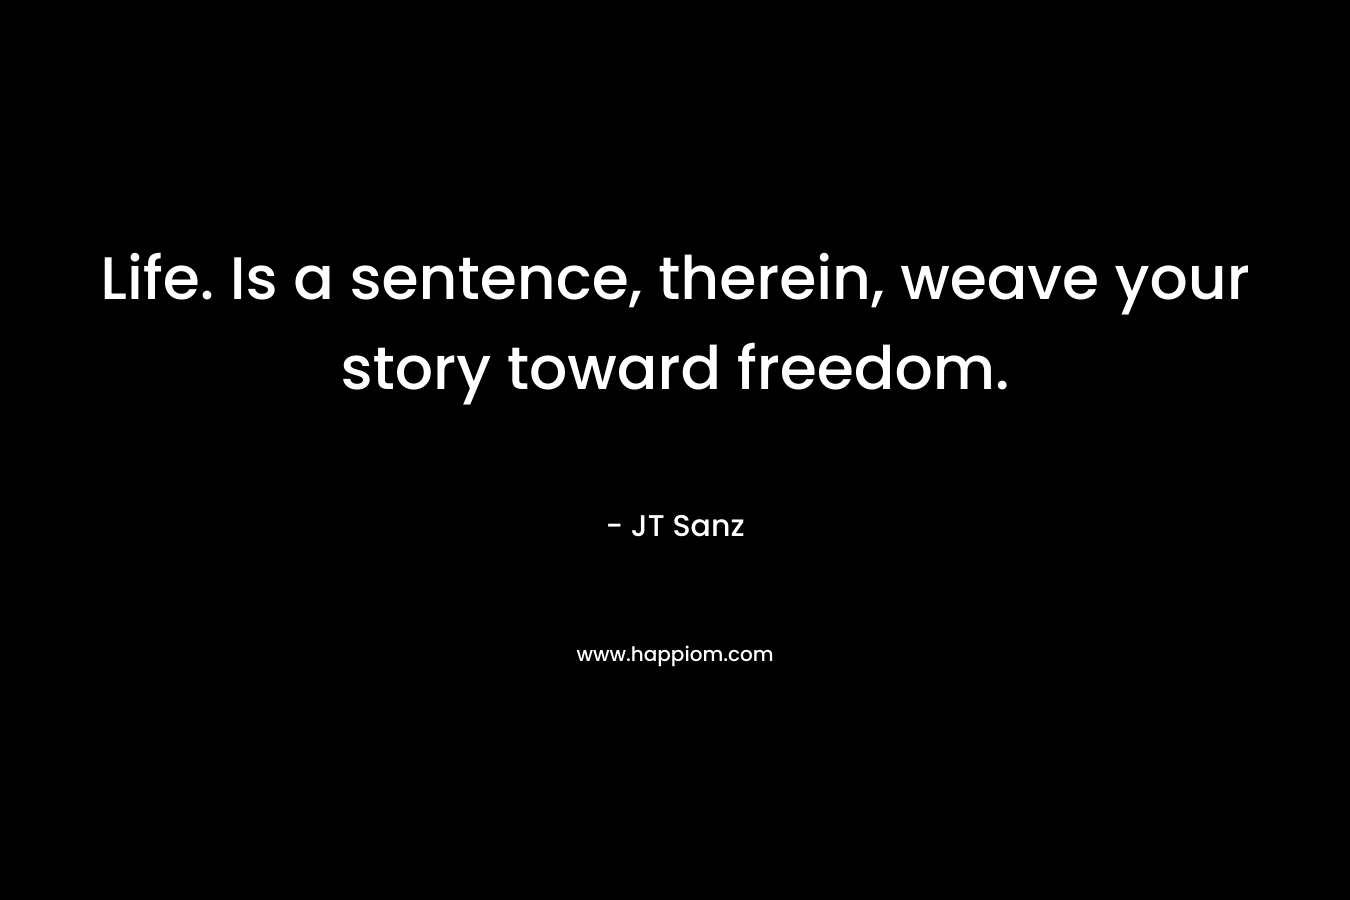 Life. Is a sentence, therein, weave your story toward freedom. – JT Sanz